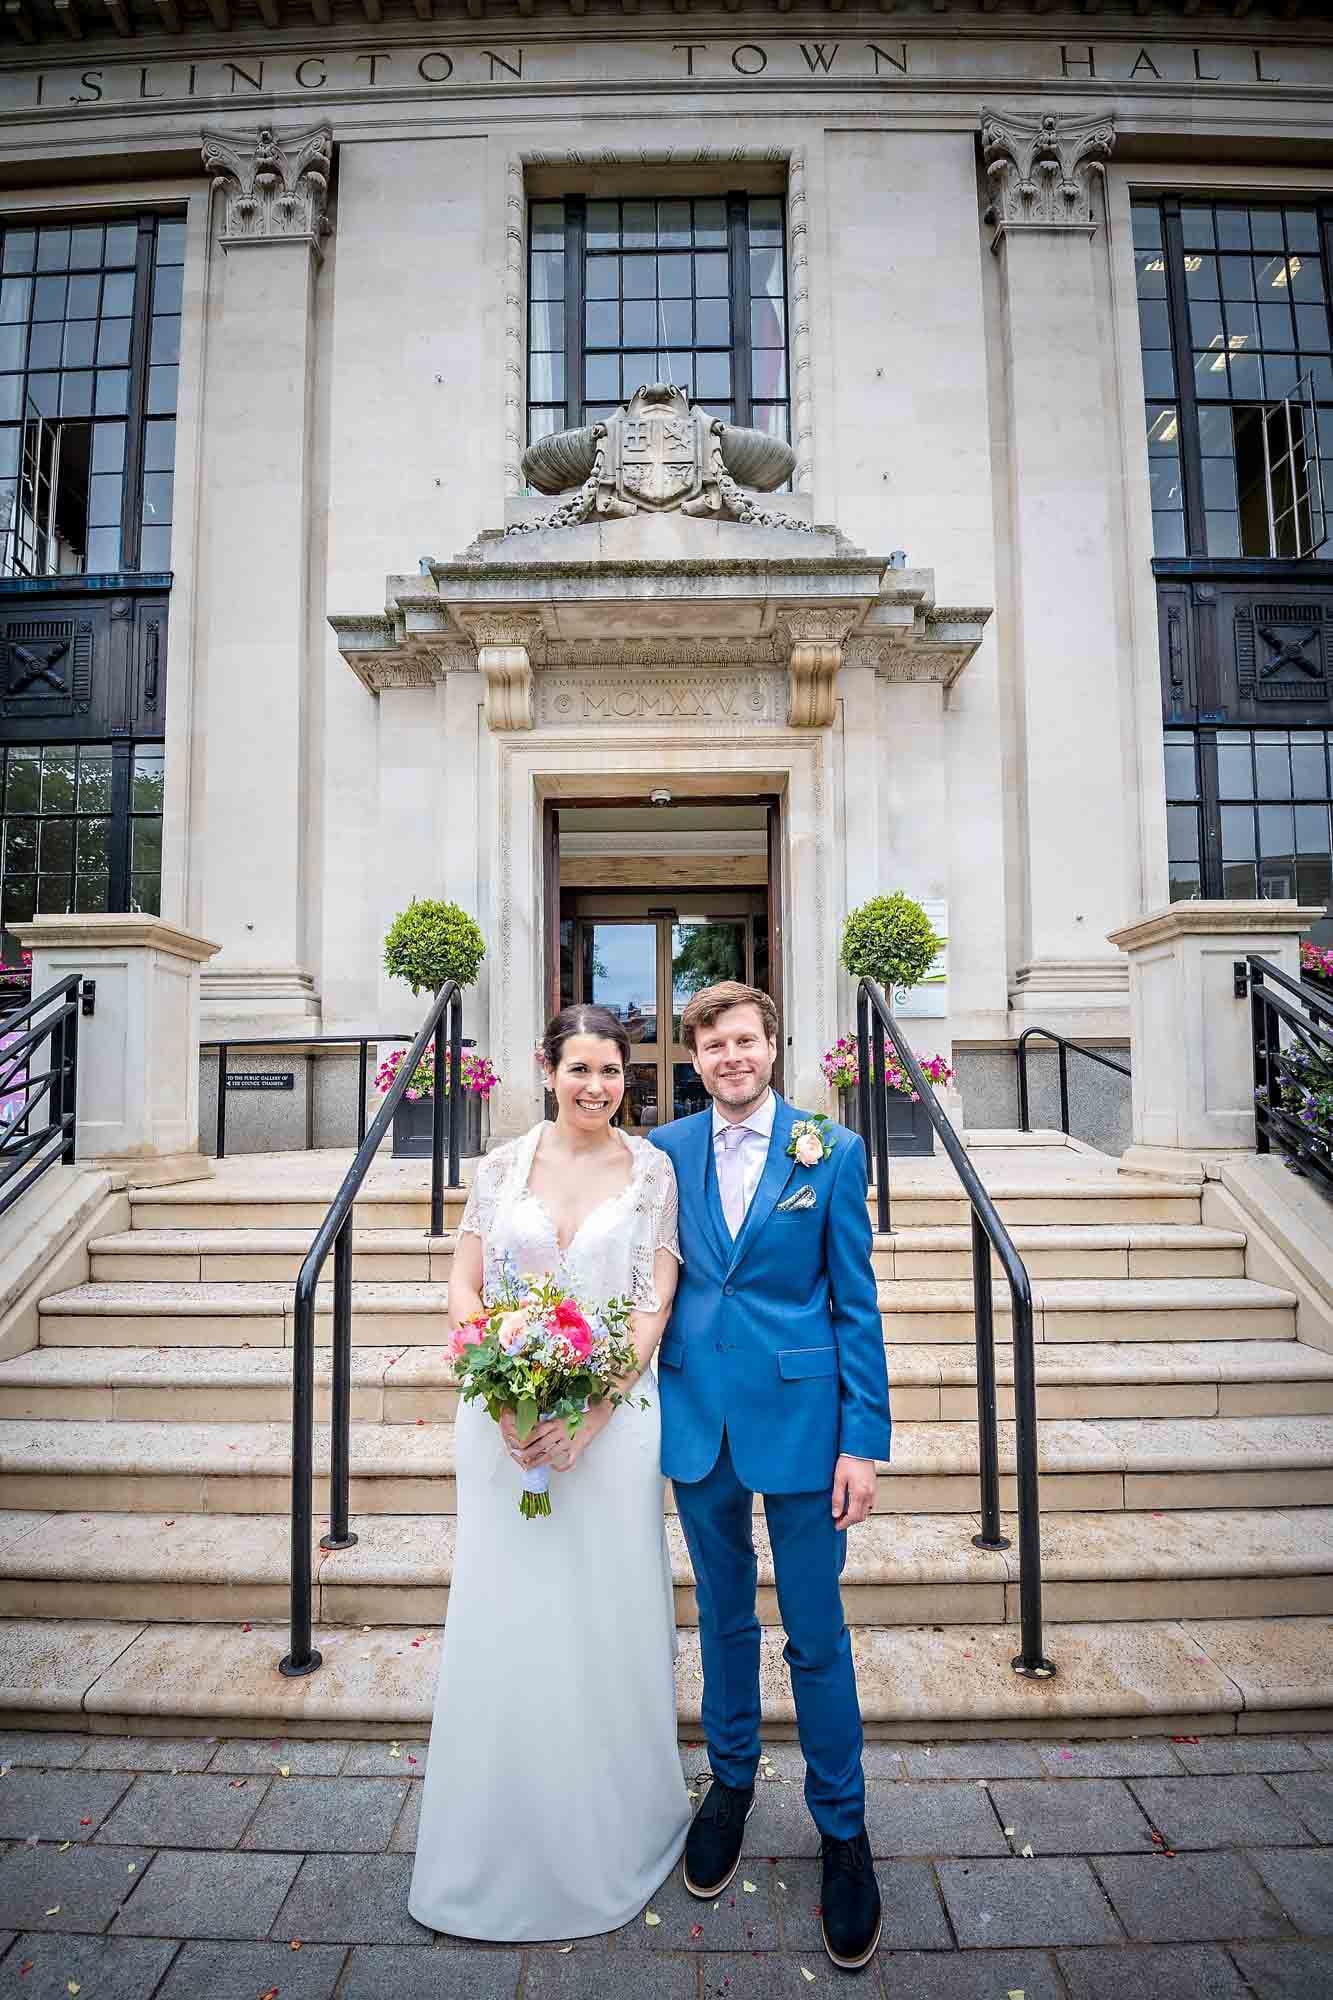 Bride with bouquet and groom in blue suit pose in front of Islingtom Town Hall